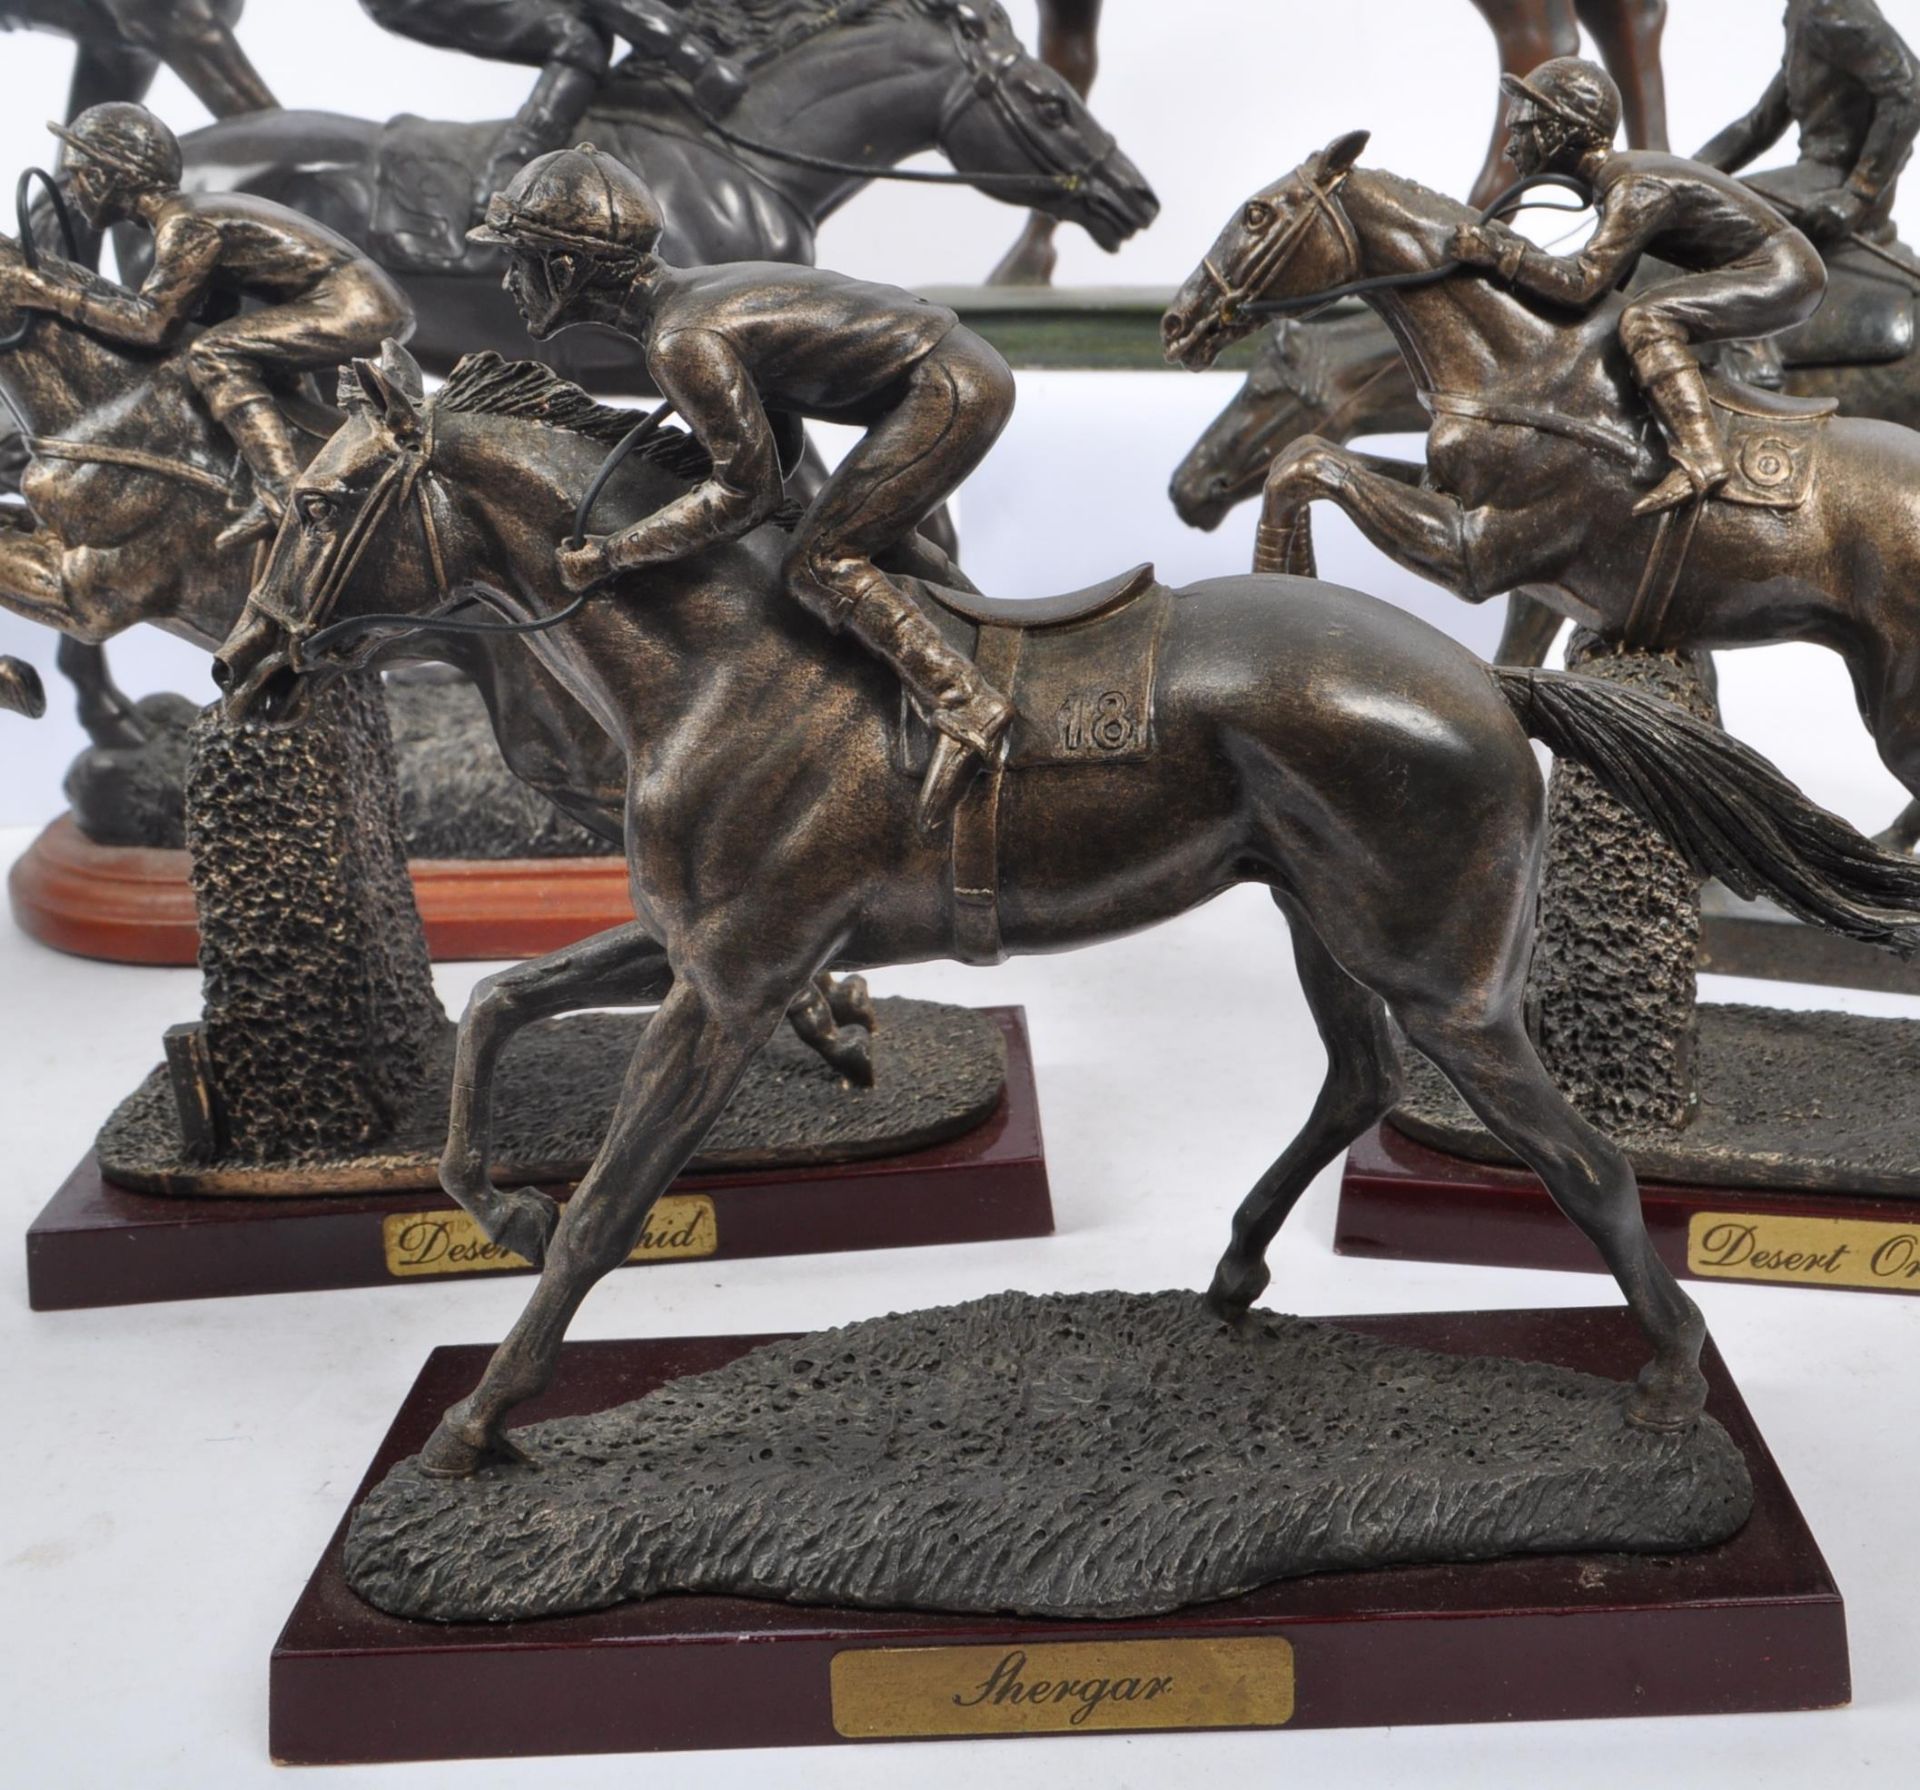 COLLECTION OF BRONZE EFFECT RACING HORSE & RIDERS FIGURES - Image 5 of 8